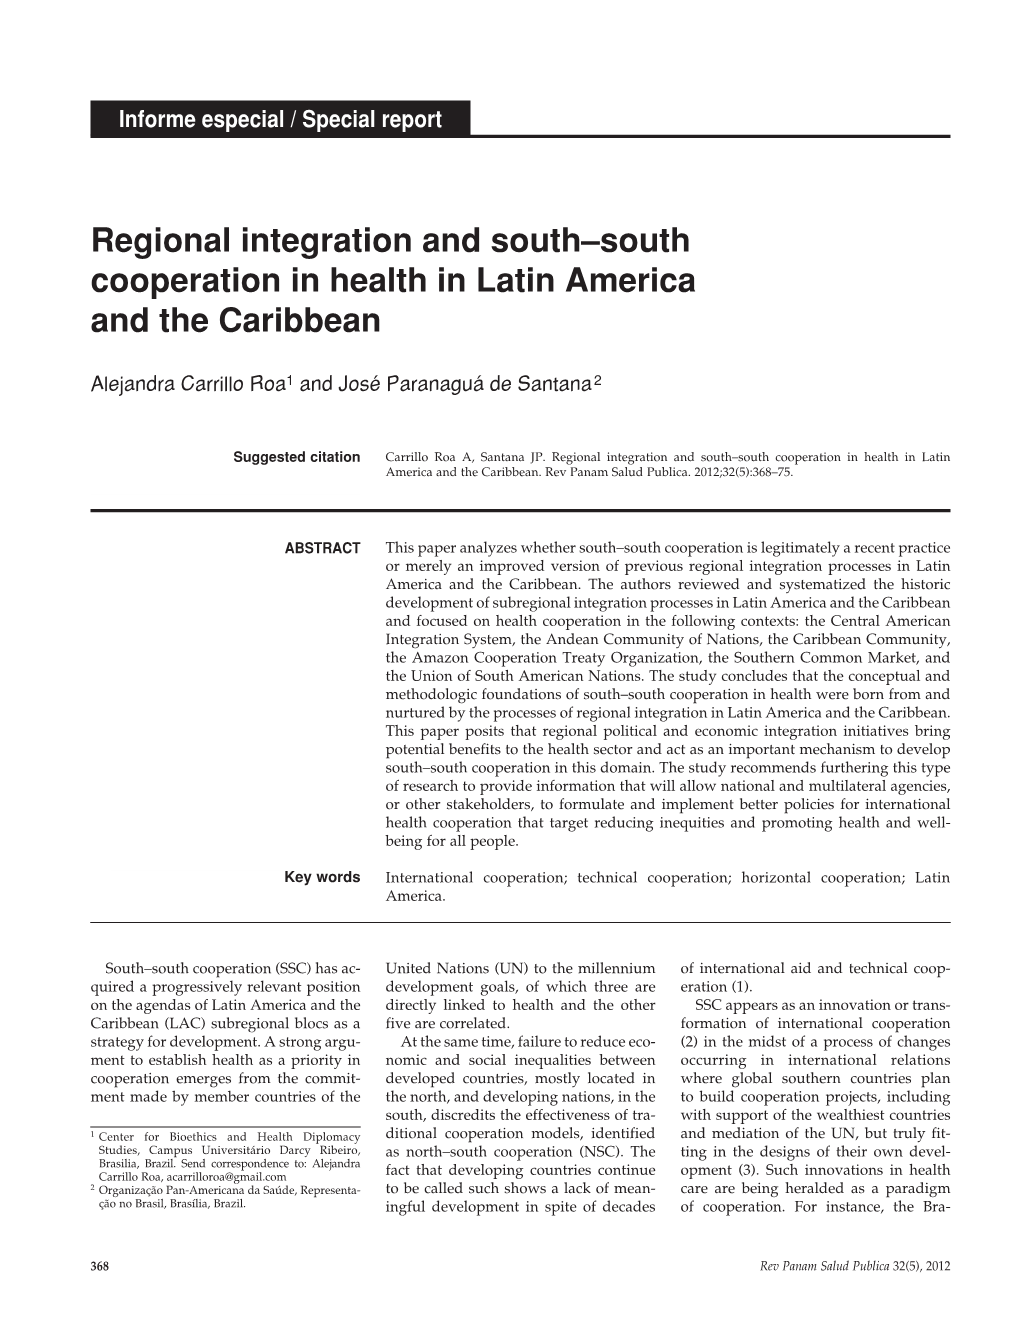 Regional Integration and South–South Cooperation in Health in Latin America and the Caribbean